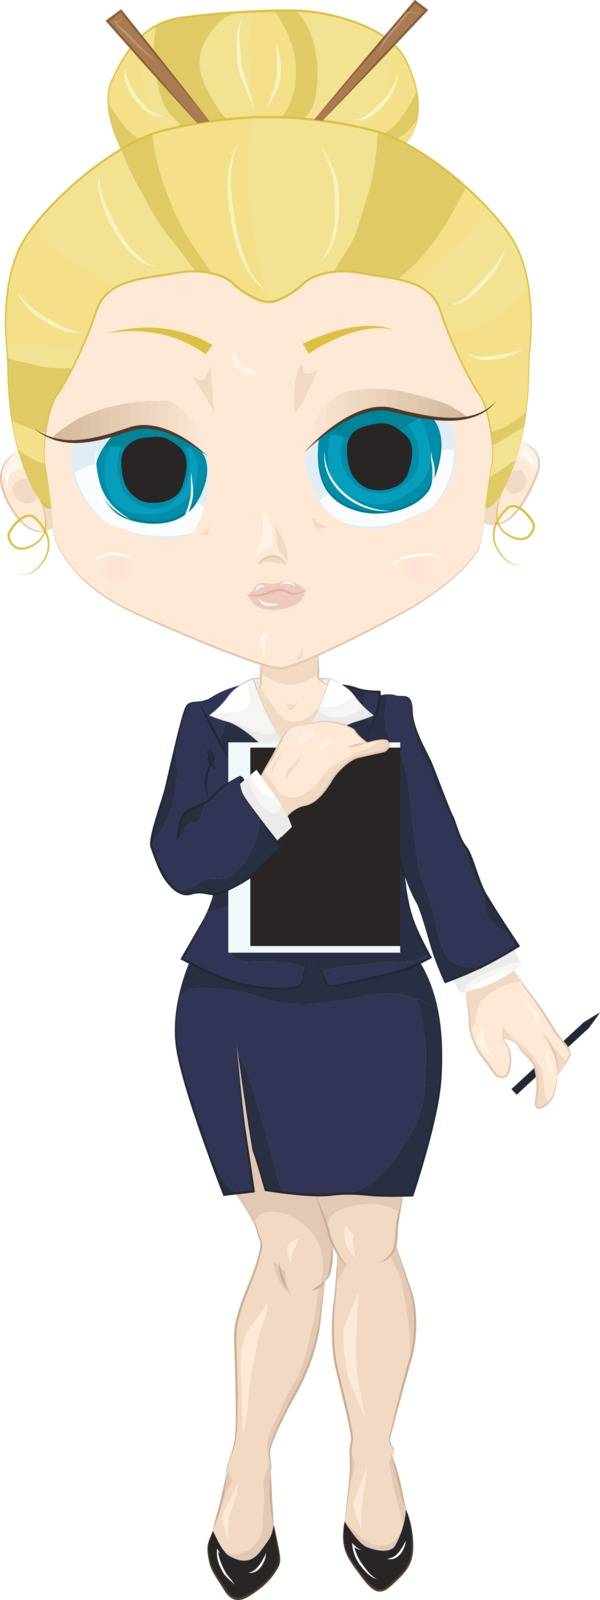 Illustration of a girl with an office suit